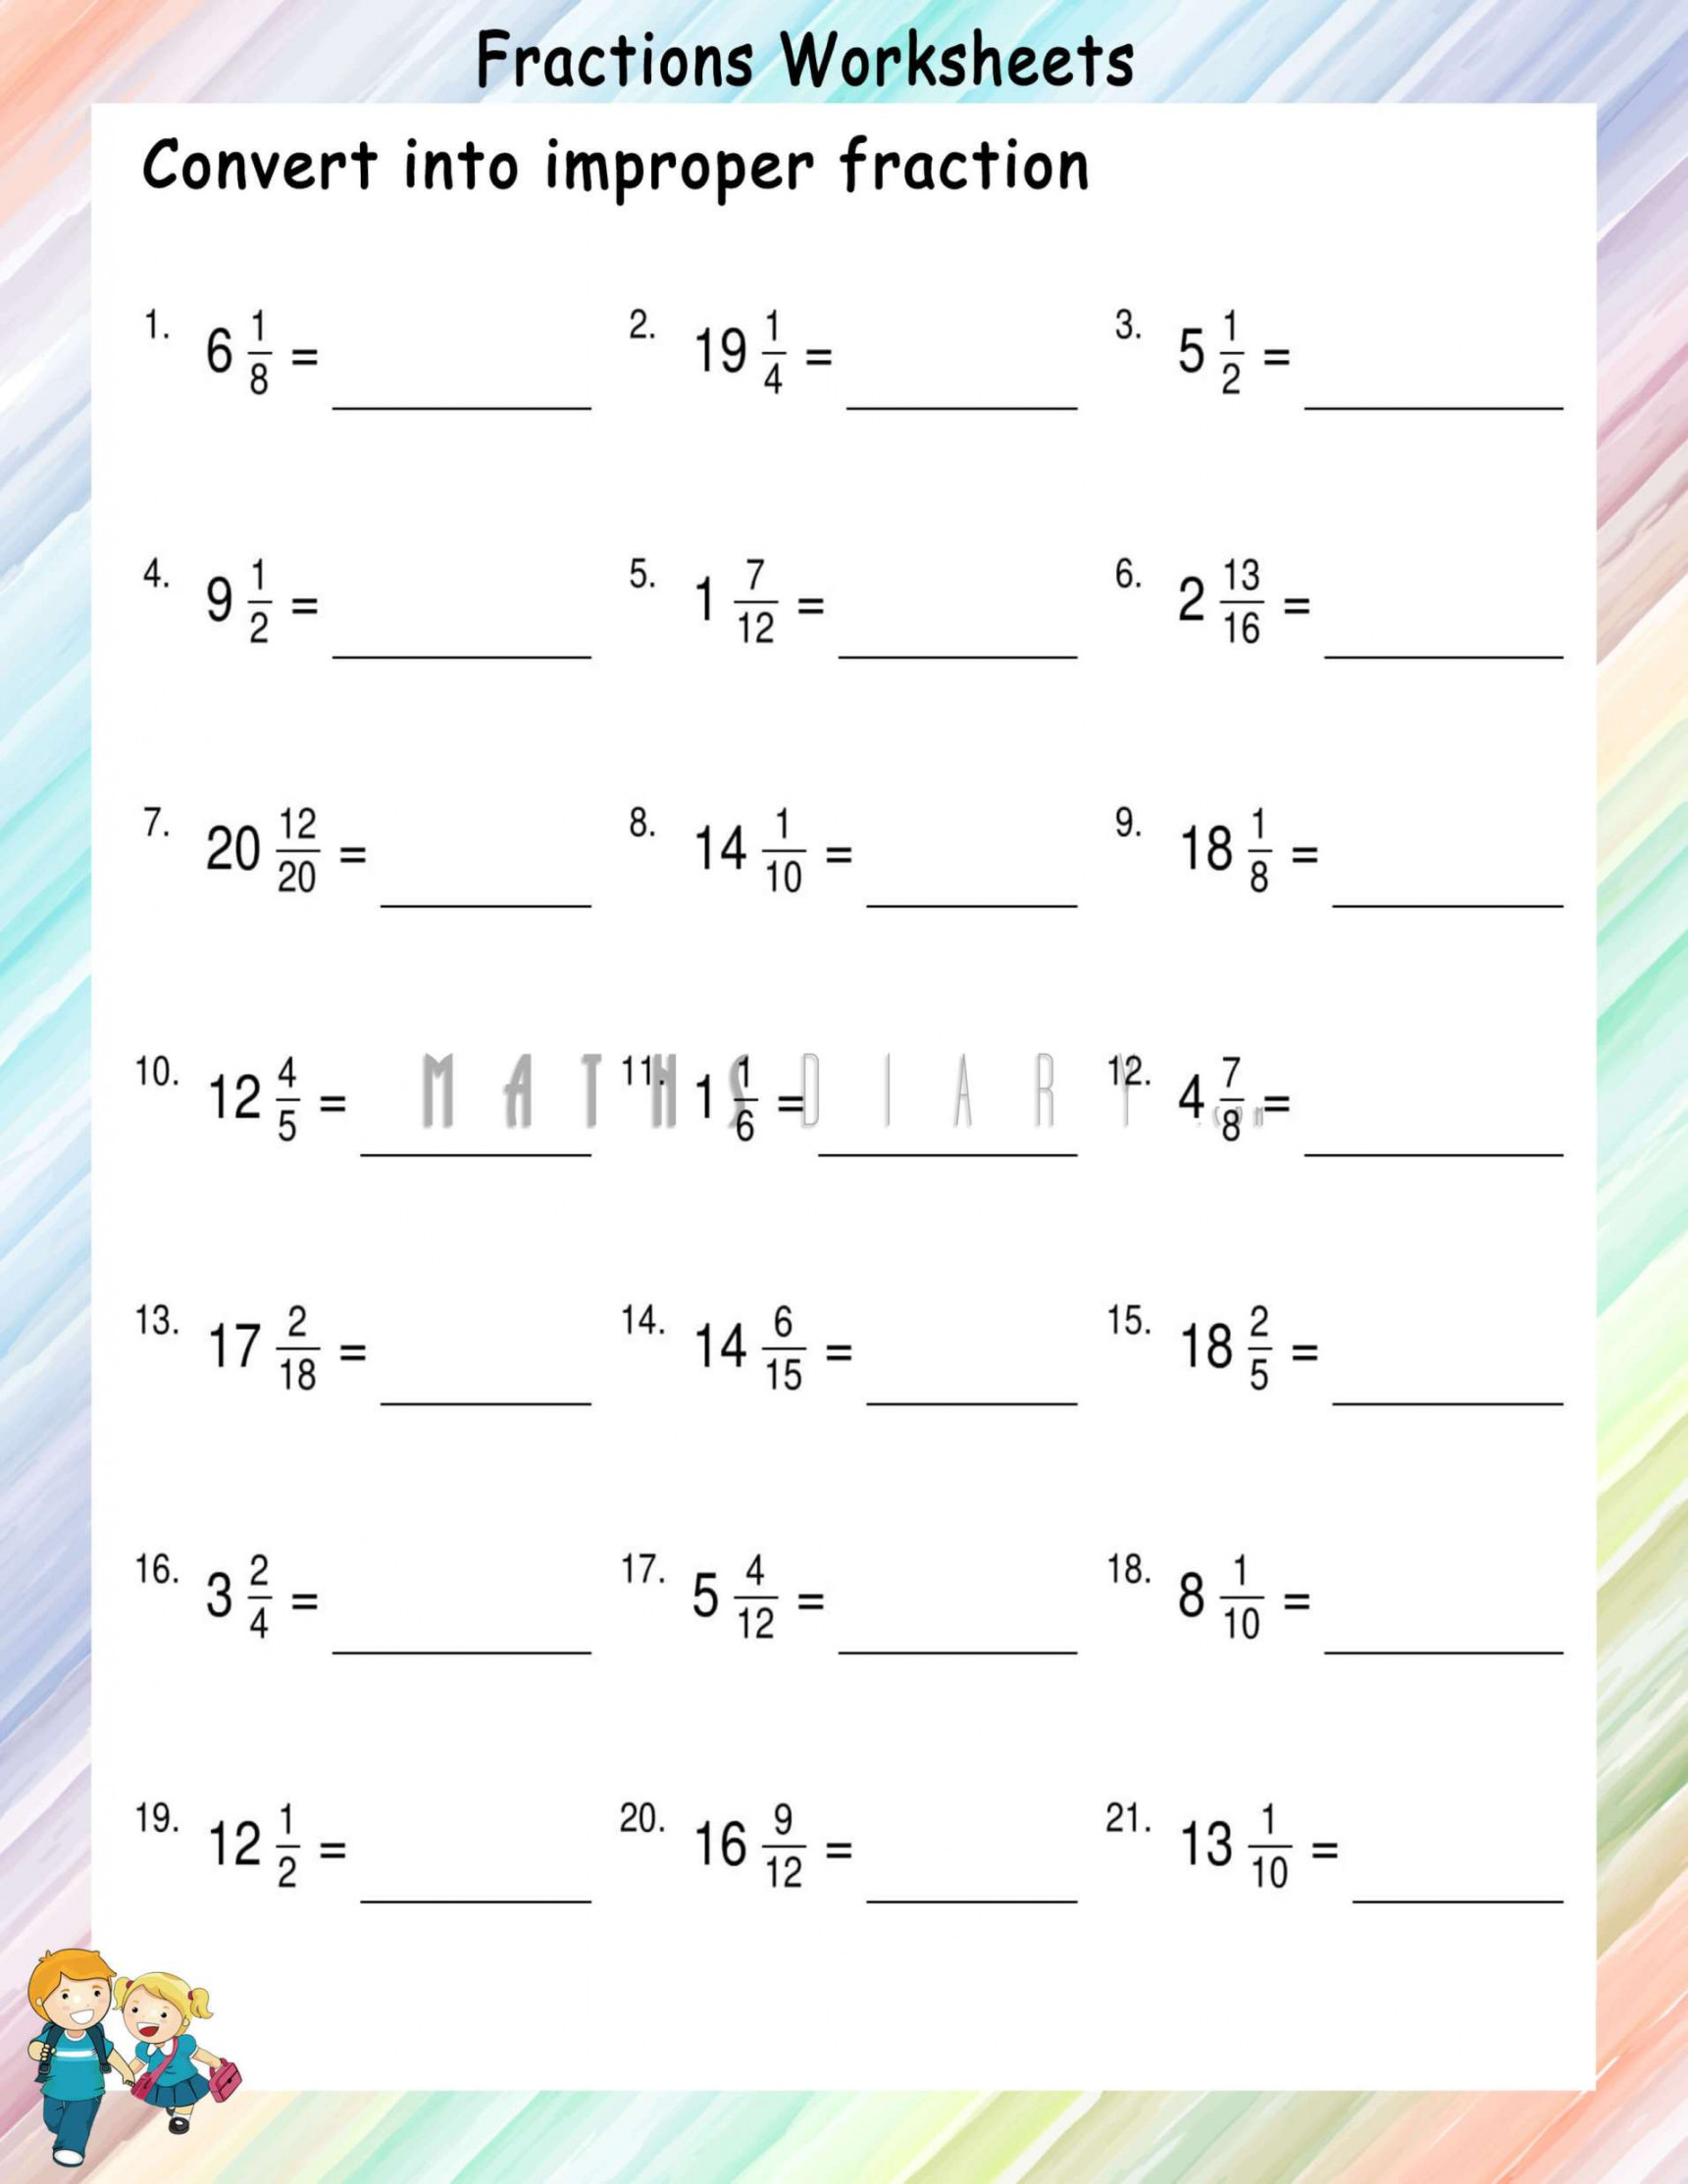 Conversion of mixed numbers to improper fractions worksheets